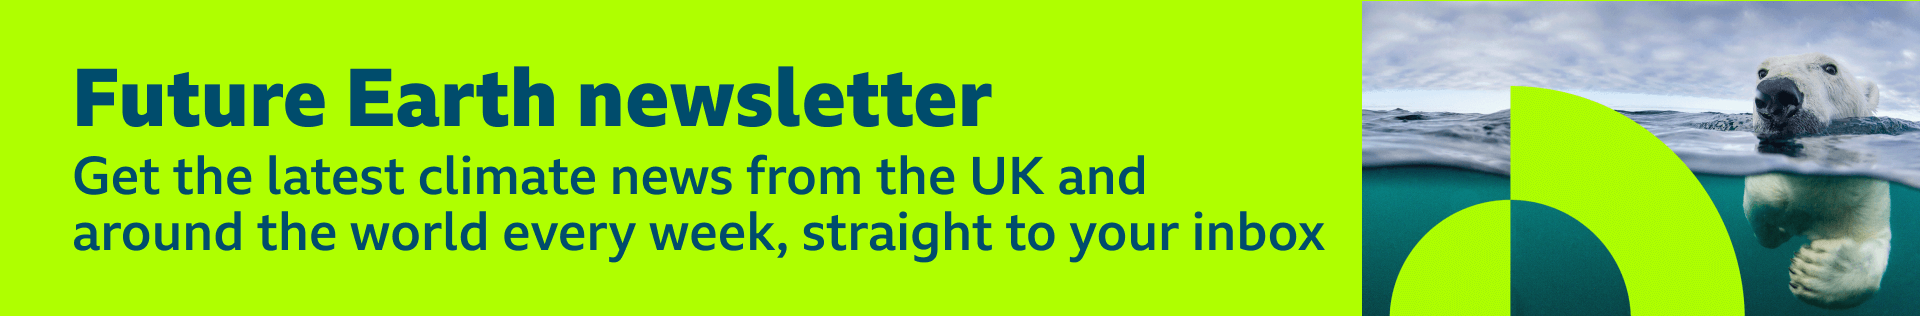 Banner promoting Future Earth newsletter with text inviting readers to 'get the latest climate news from the UK and around the world every week, straight to your inbox